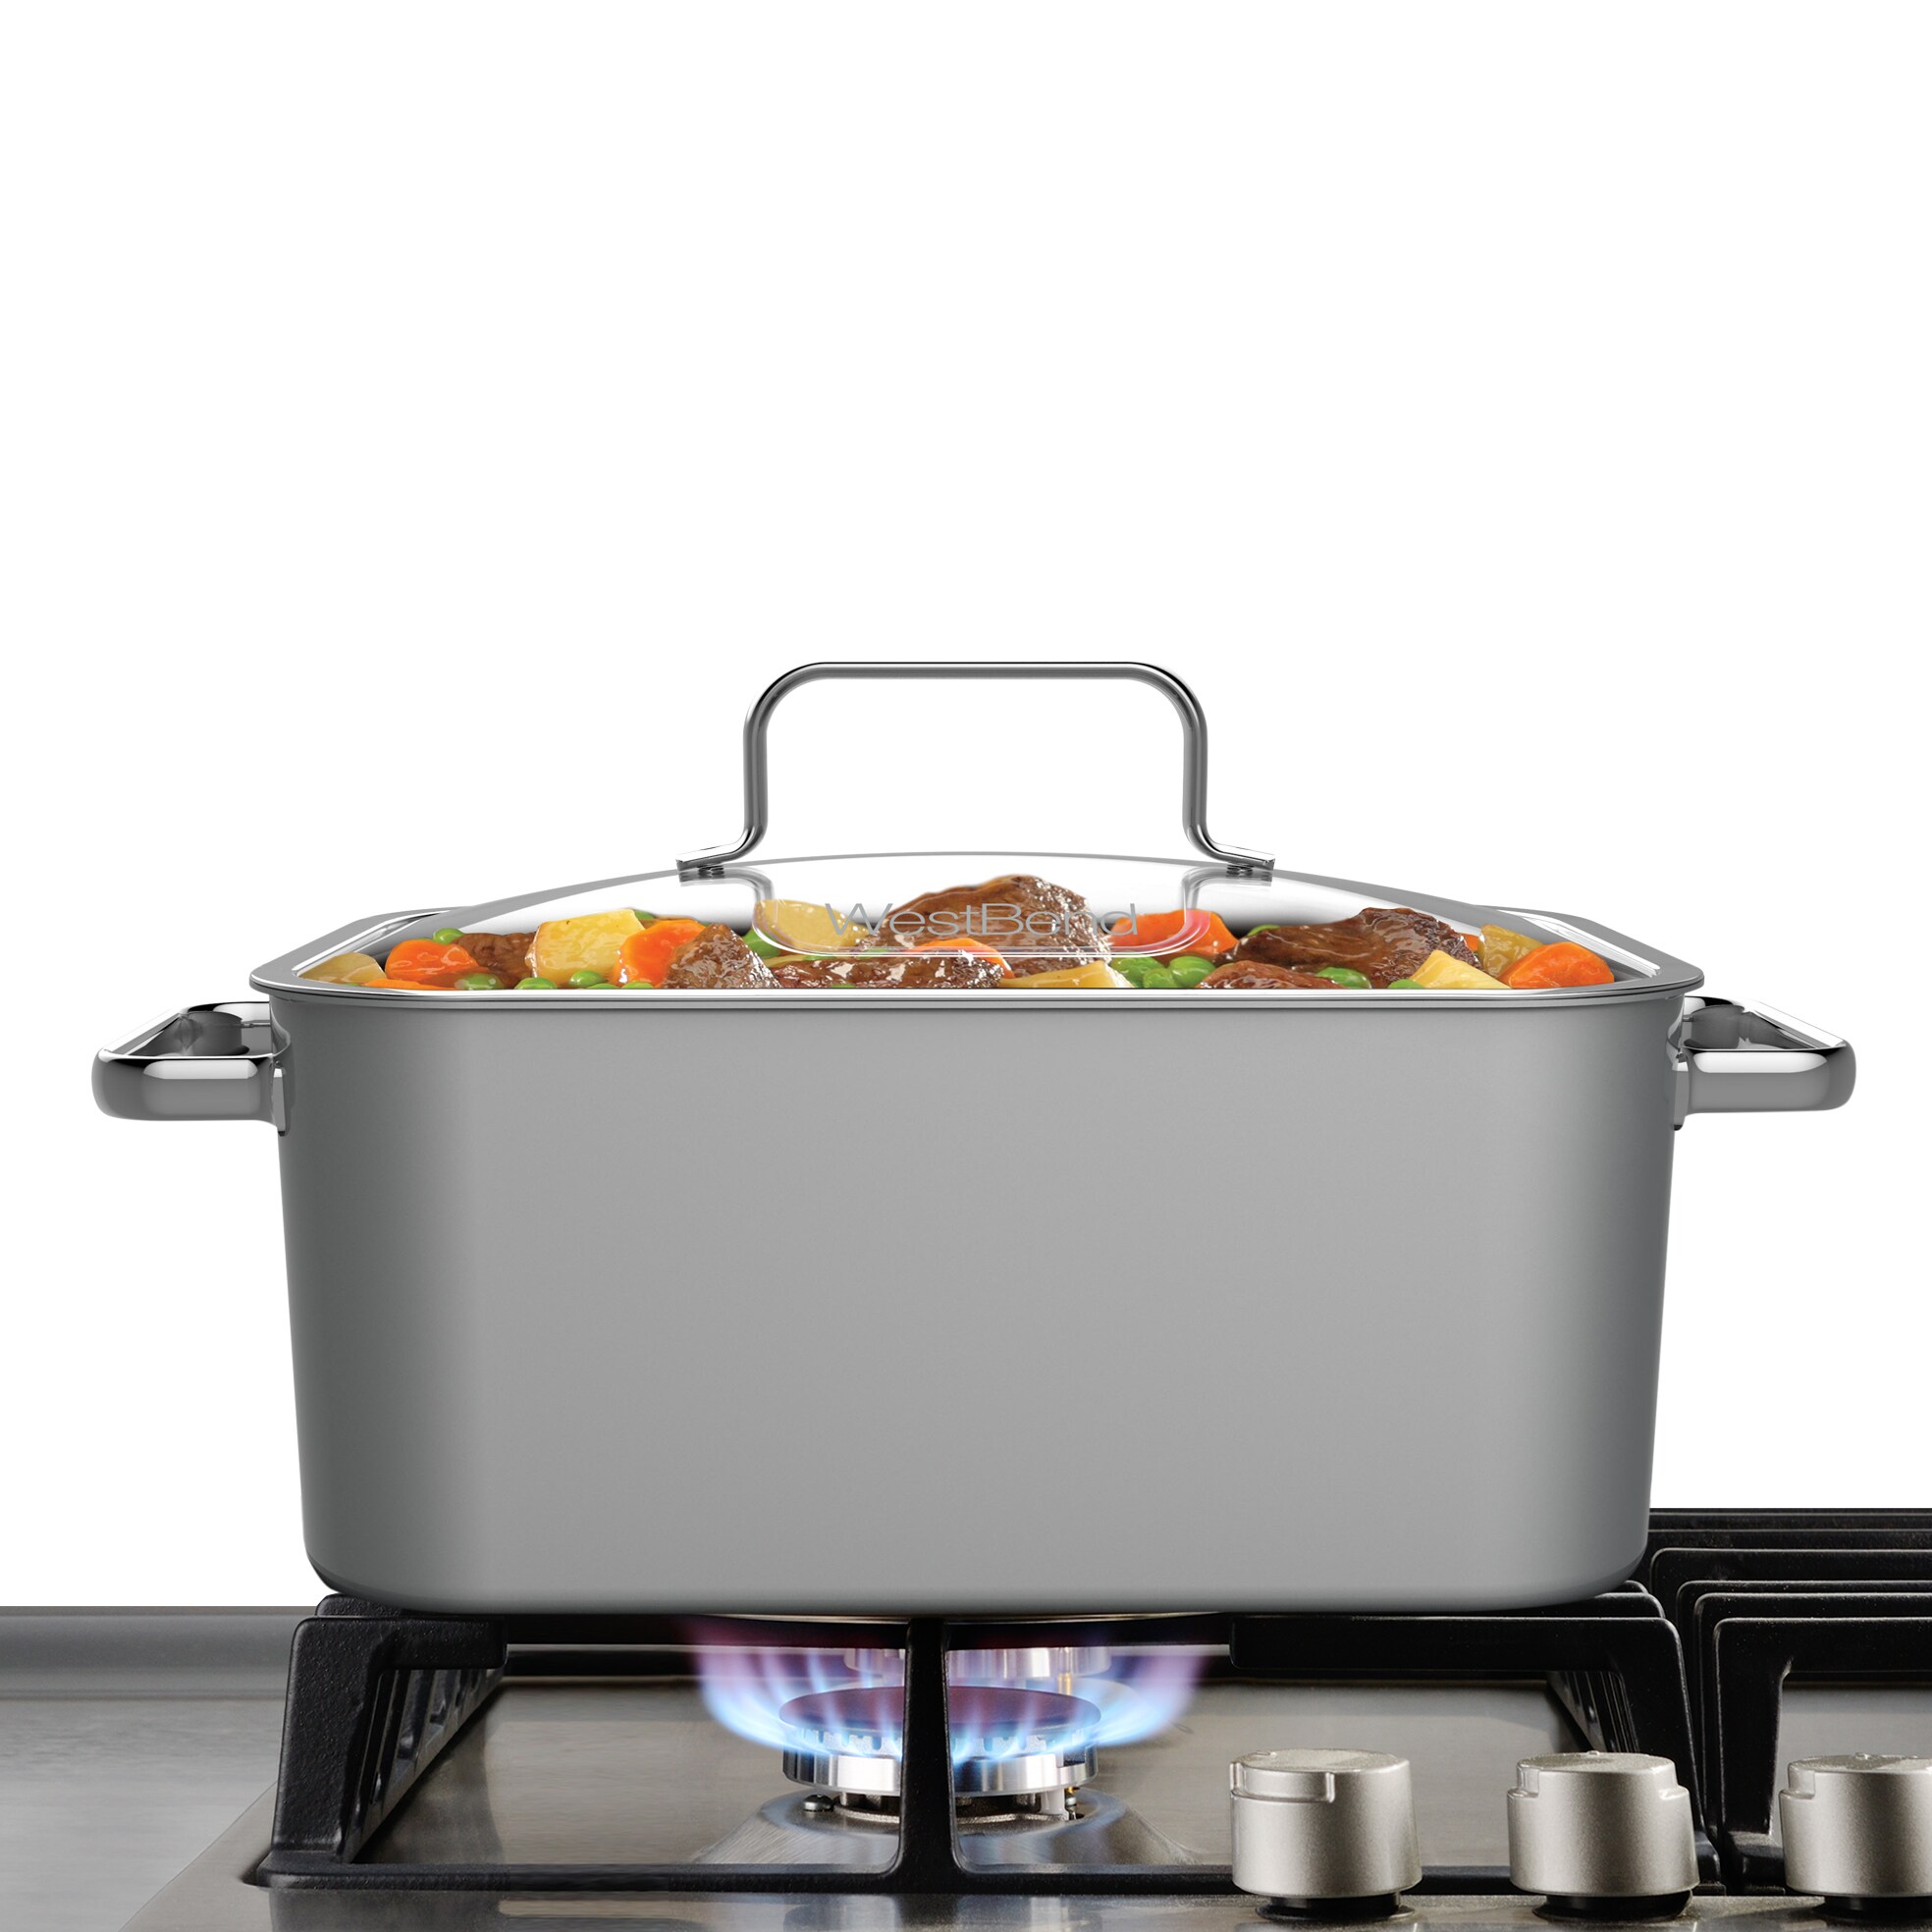 Lock in Place West Bend Stainless Steel 5 Qt. Versatility Cooker